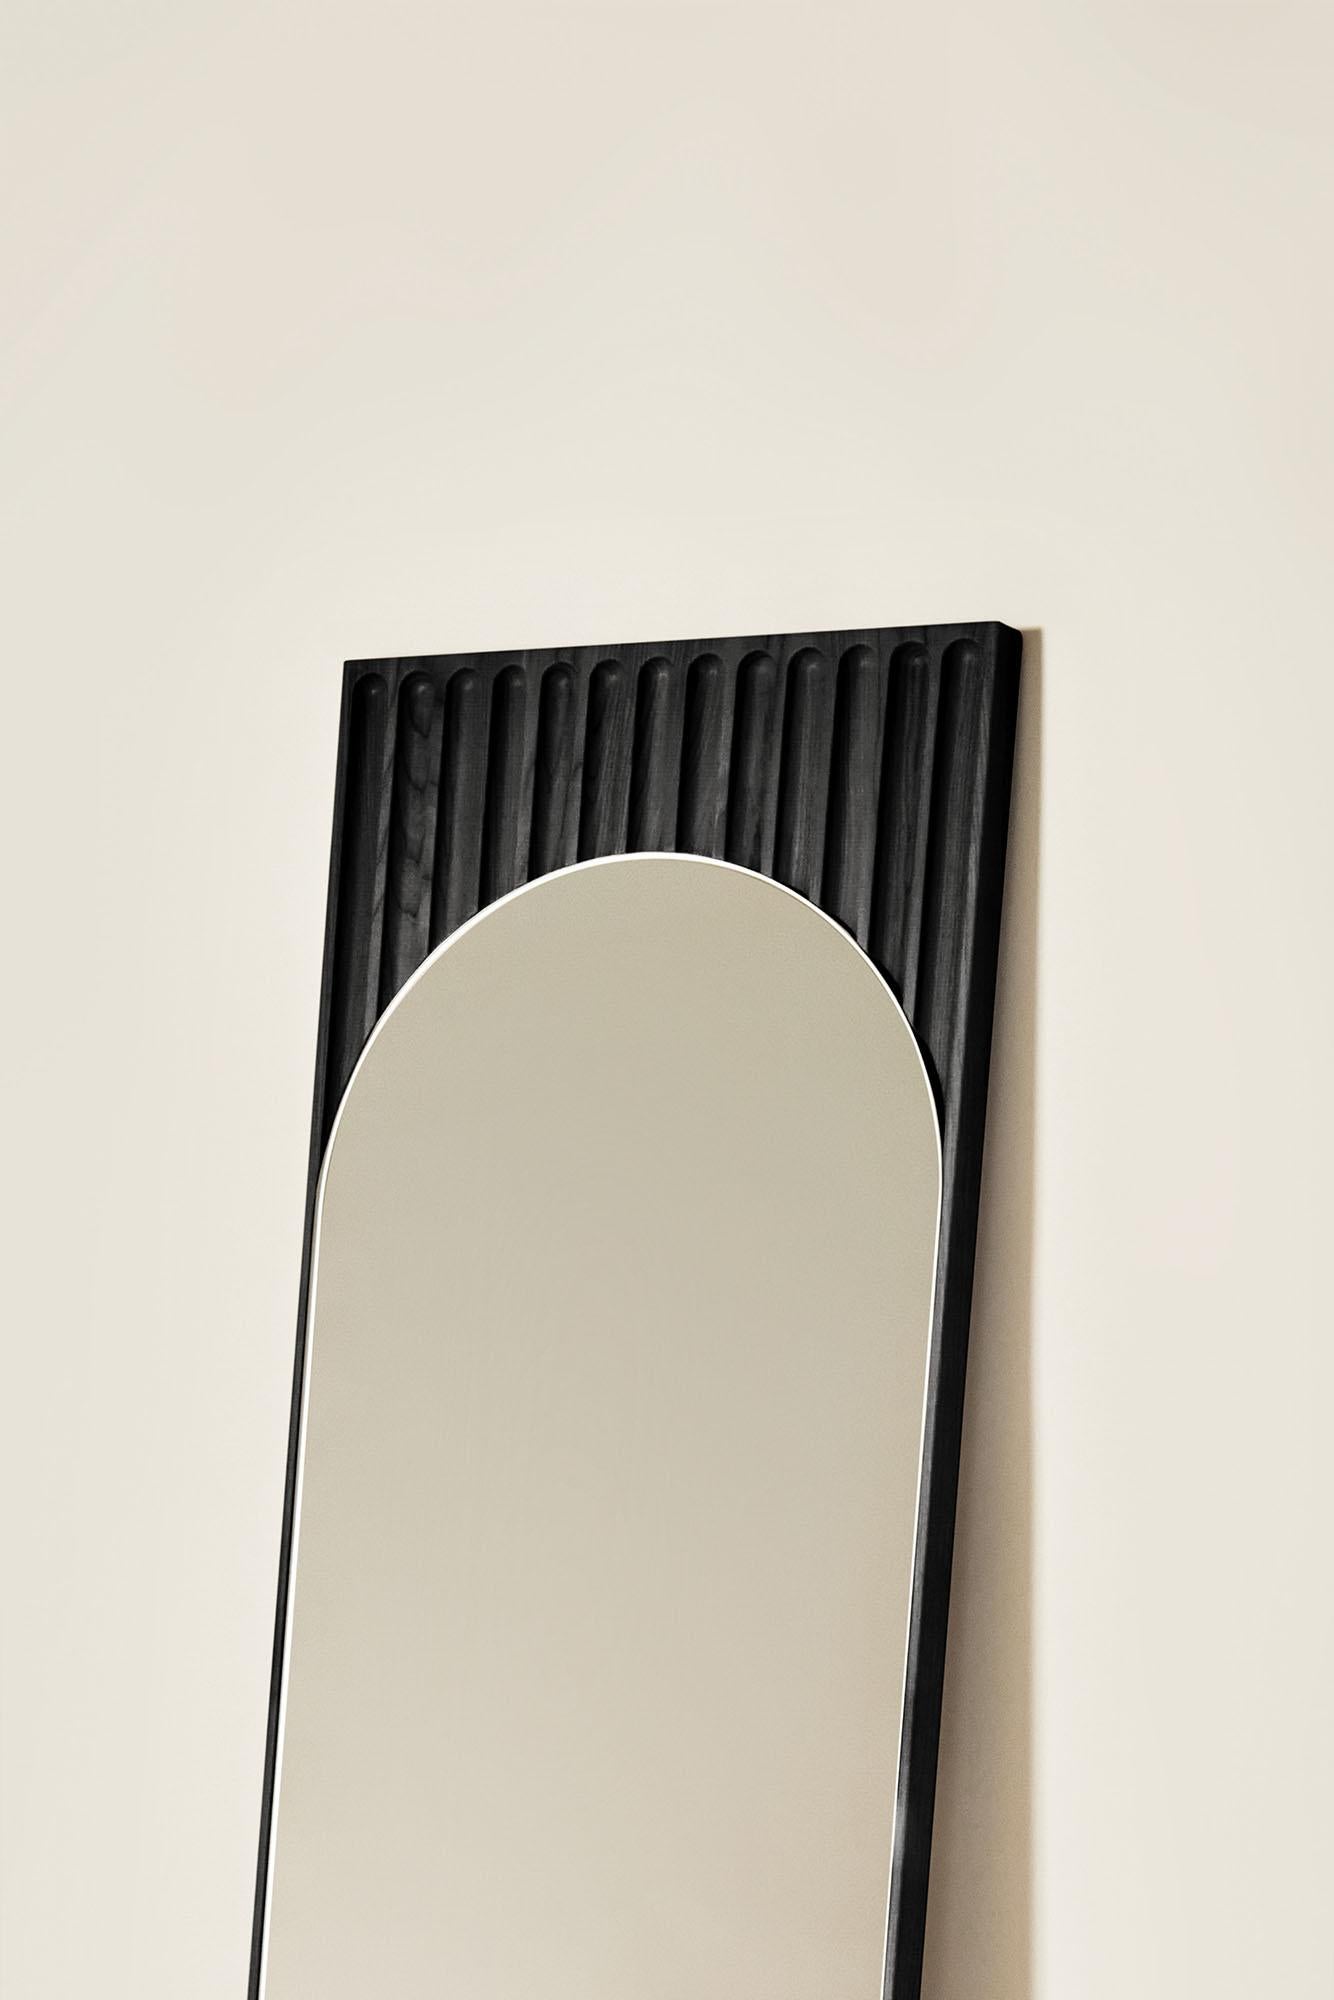 Modern Tutto Sesto Solid Wood Rectangular Mirror, Ash in Black Finish, Contemporary For Sale